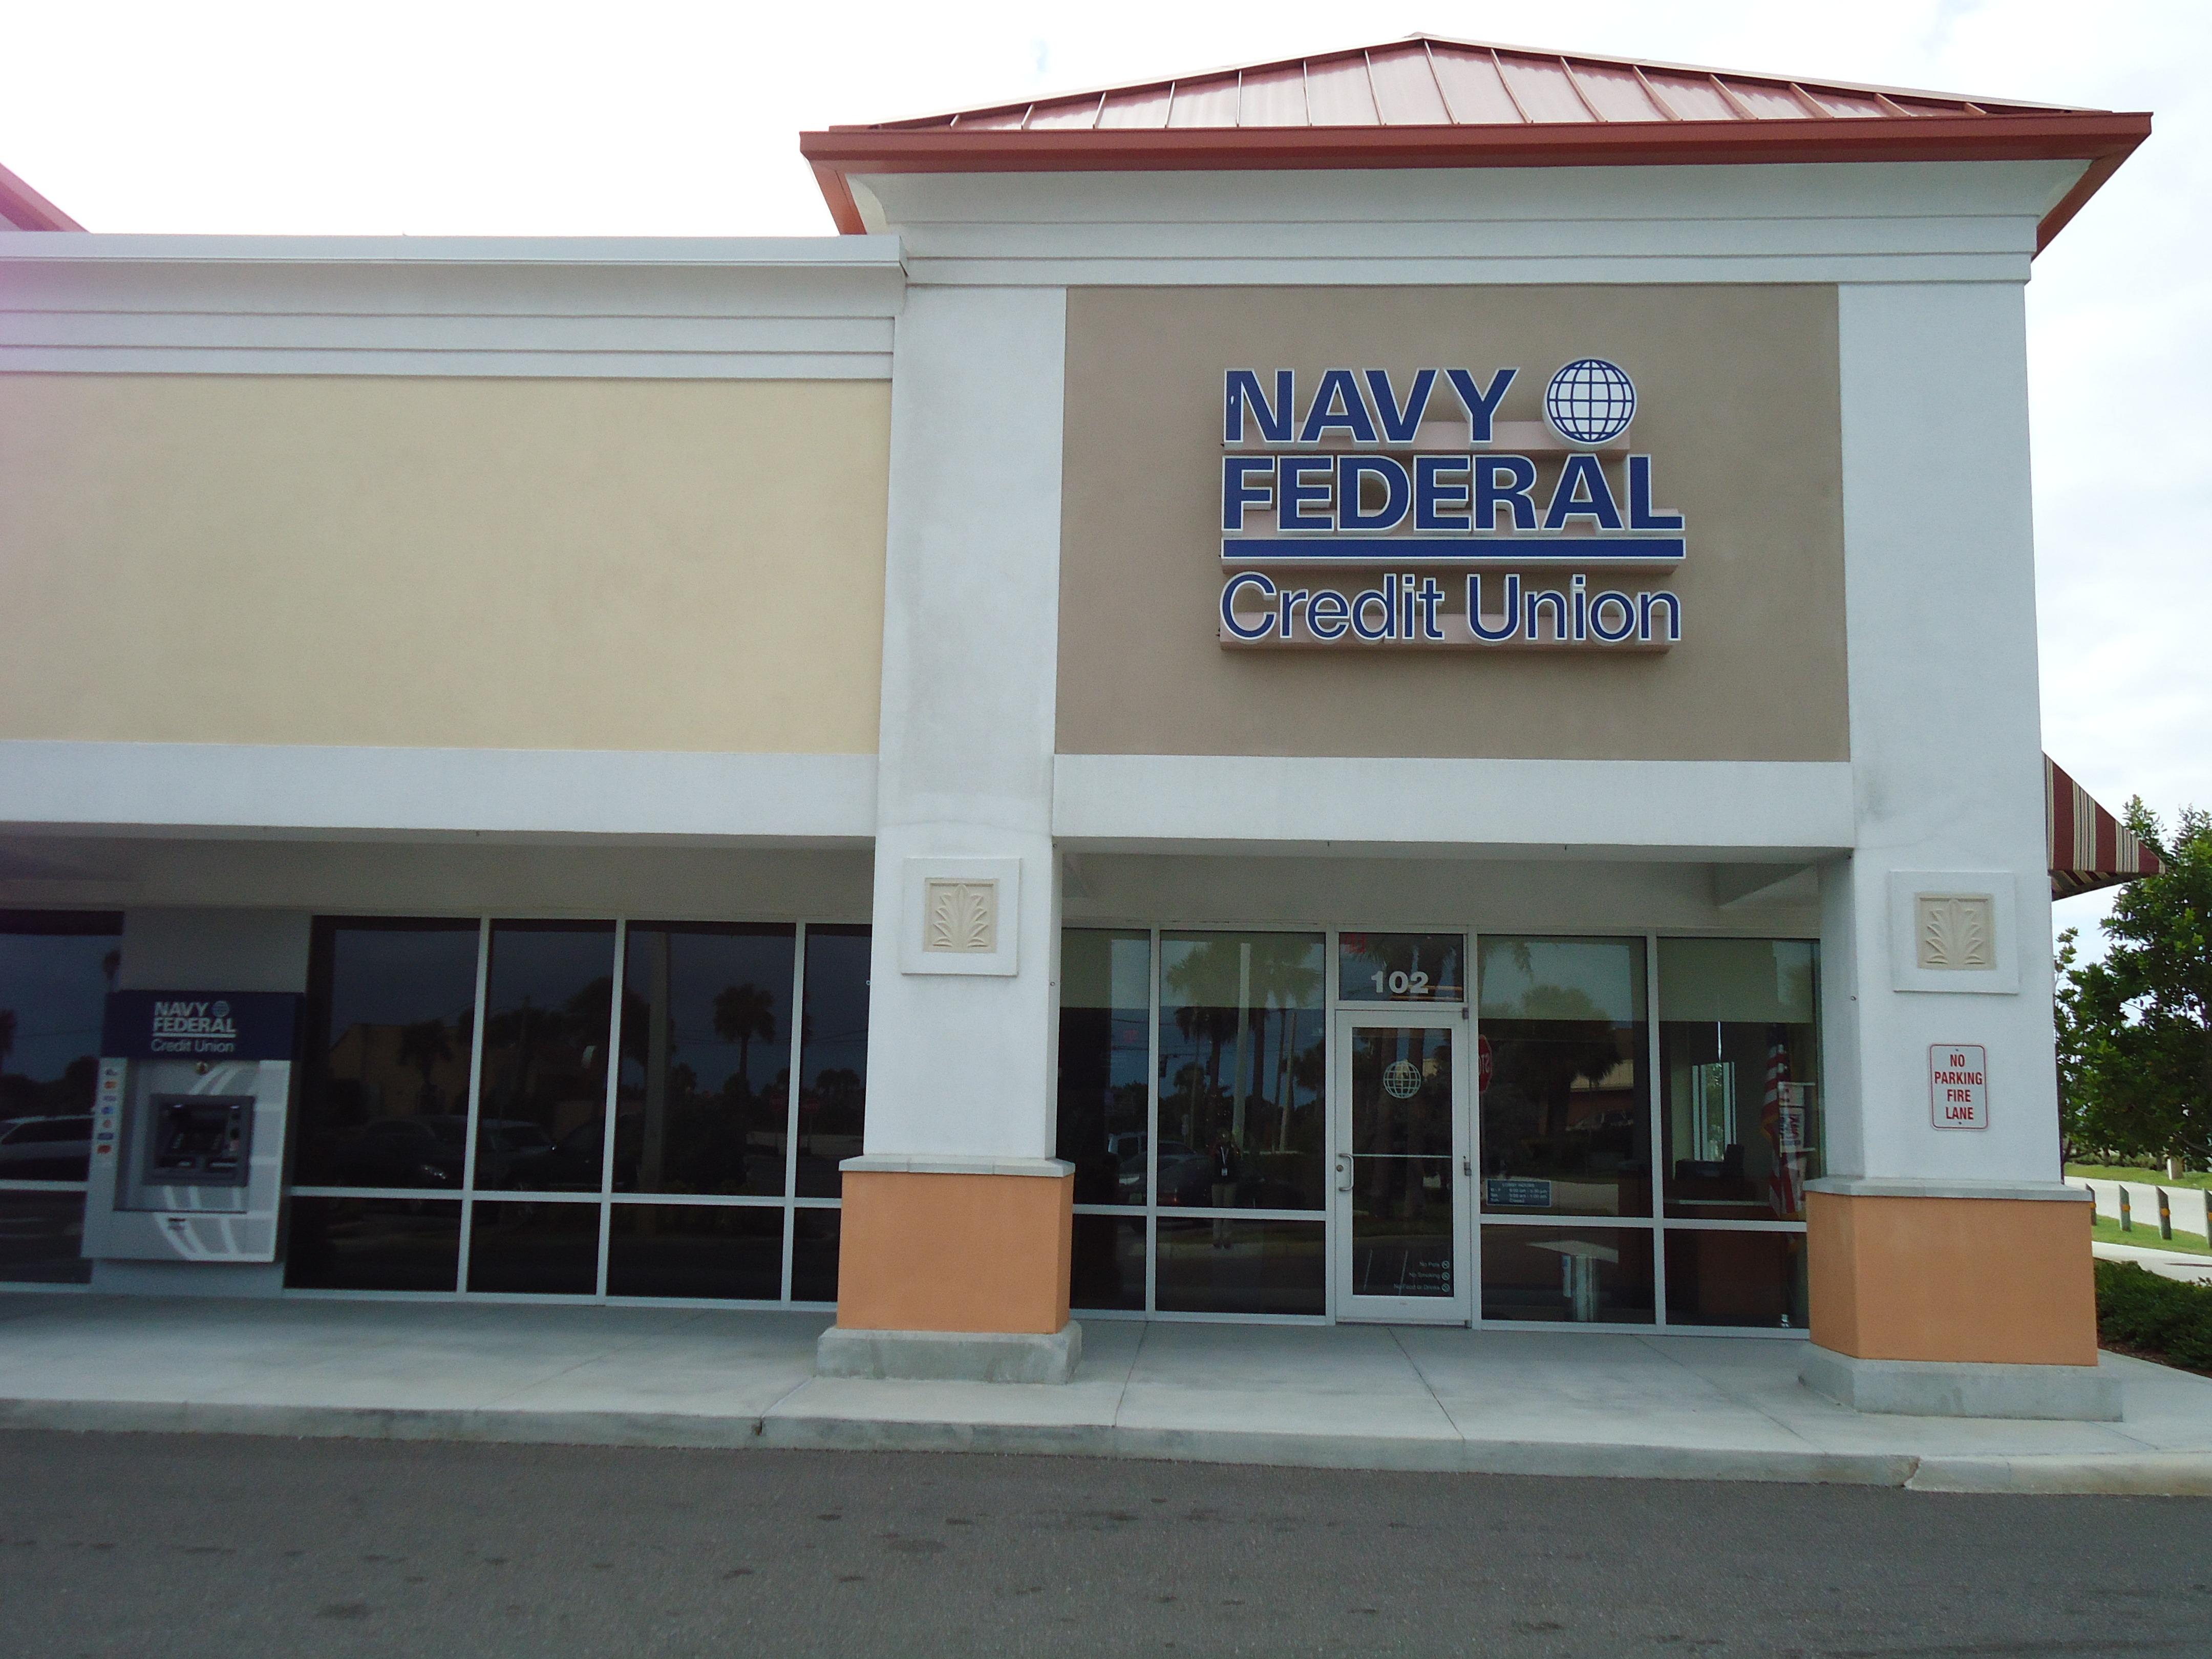 Navy Federal Credit Union Coupons near me in Satellite Beach | 8coupons